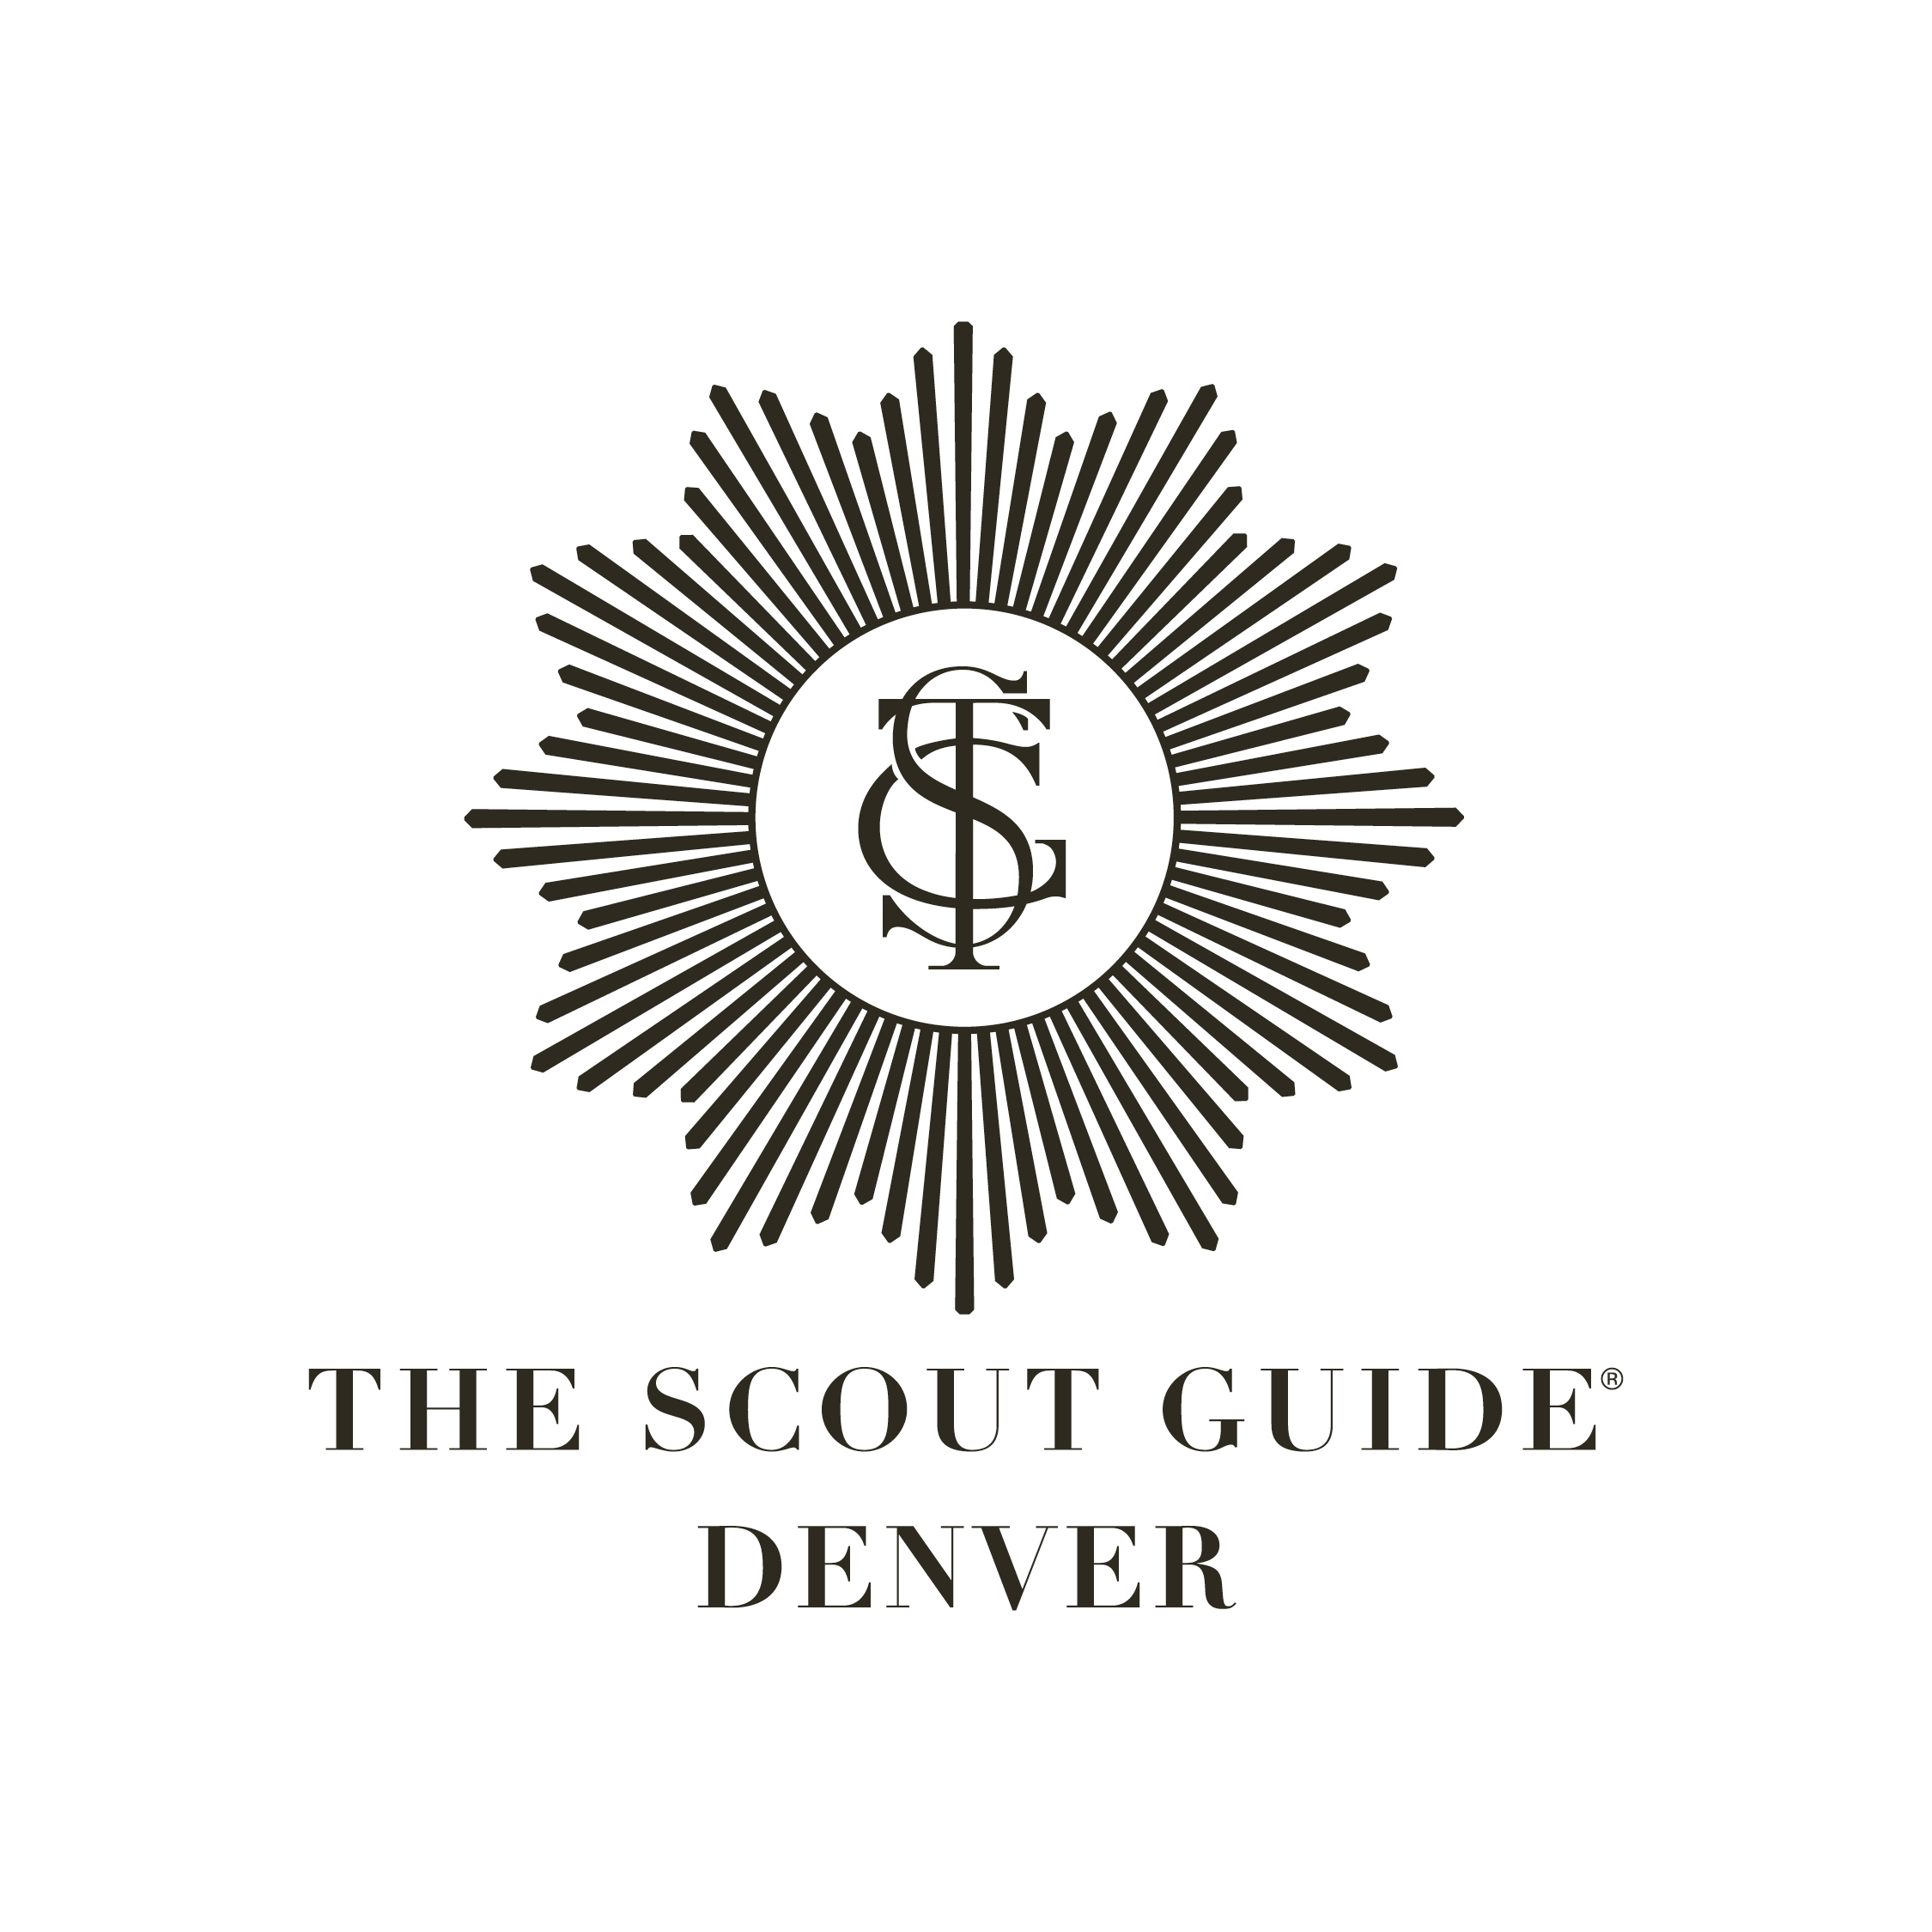 Logo of "the scout guide denver" featuring a stylized sunburst design centered around the initials "tsg" in a monogram style.